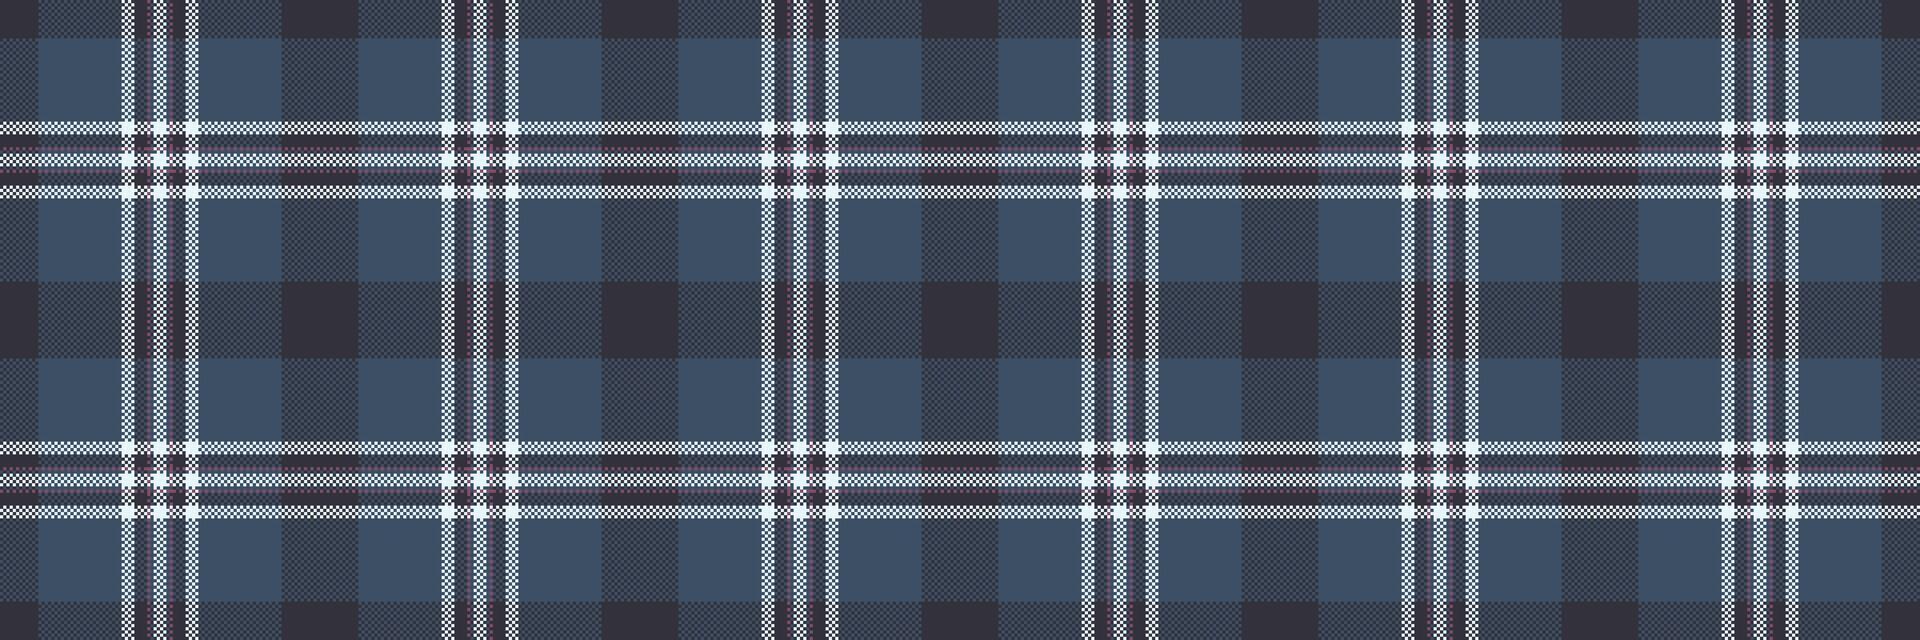 Dress vector texture tartan, strip textile background seamless. Top check fabric plaid pattern in blue and dark colors.